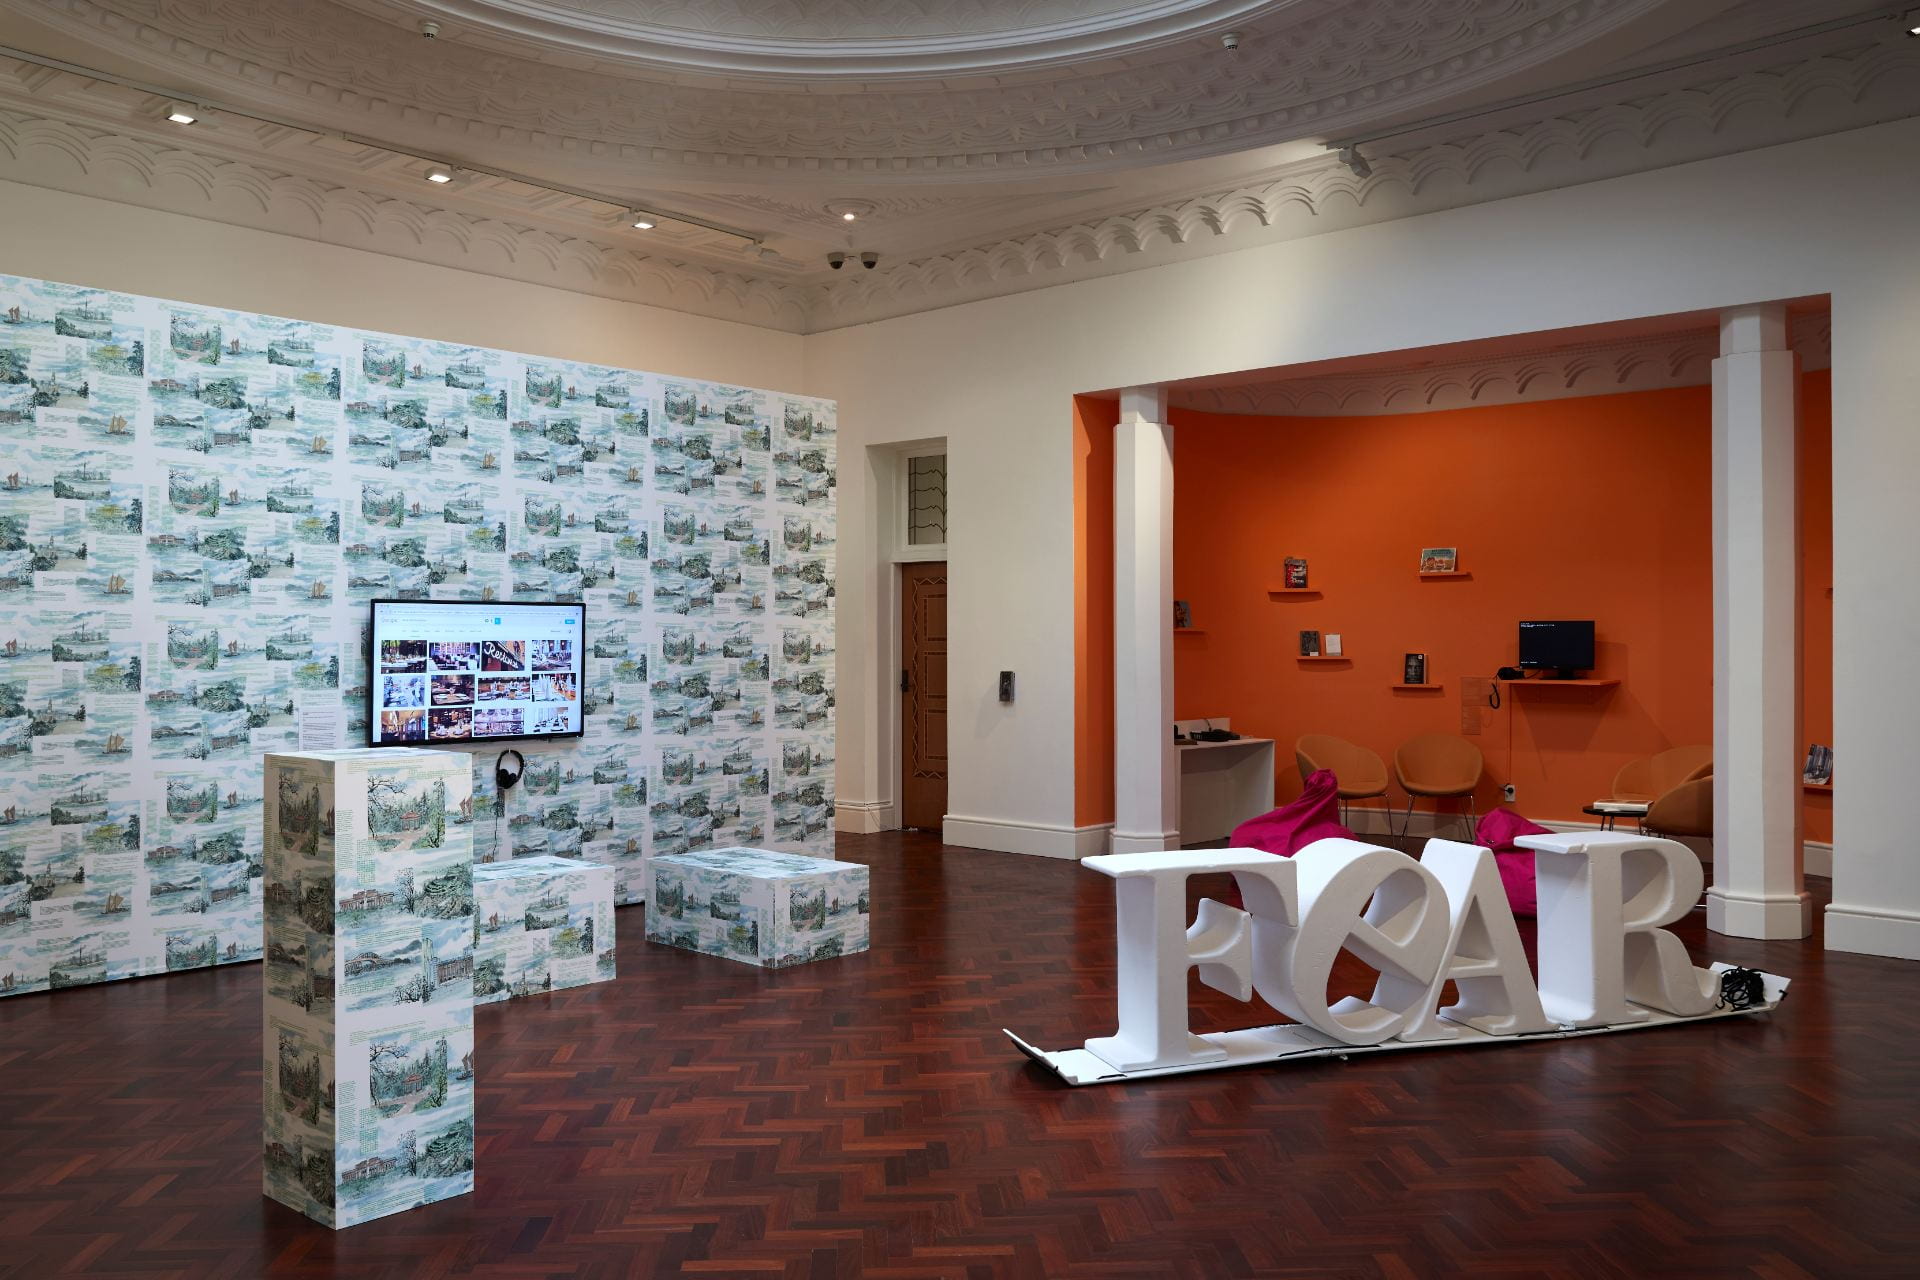 A gallery room. On the left is a wall covered in wallpaper depicting landmarks around Auckland. On the right is an alcove painted orange, and giant white 3D letters spelling out 'FEAR'.